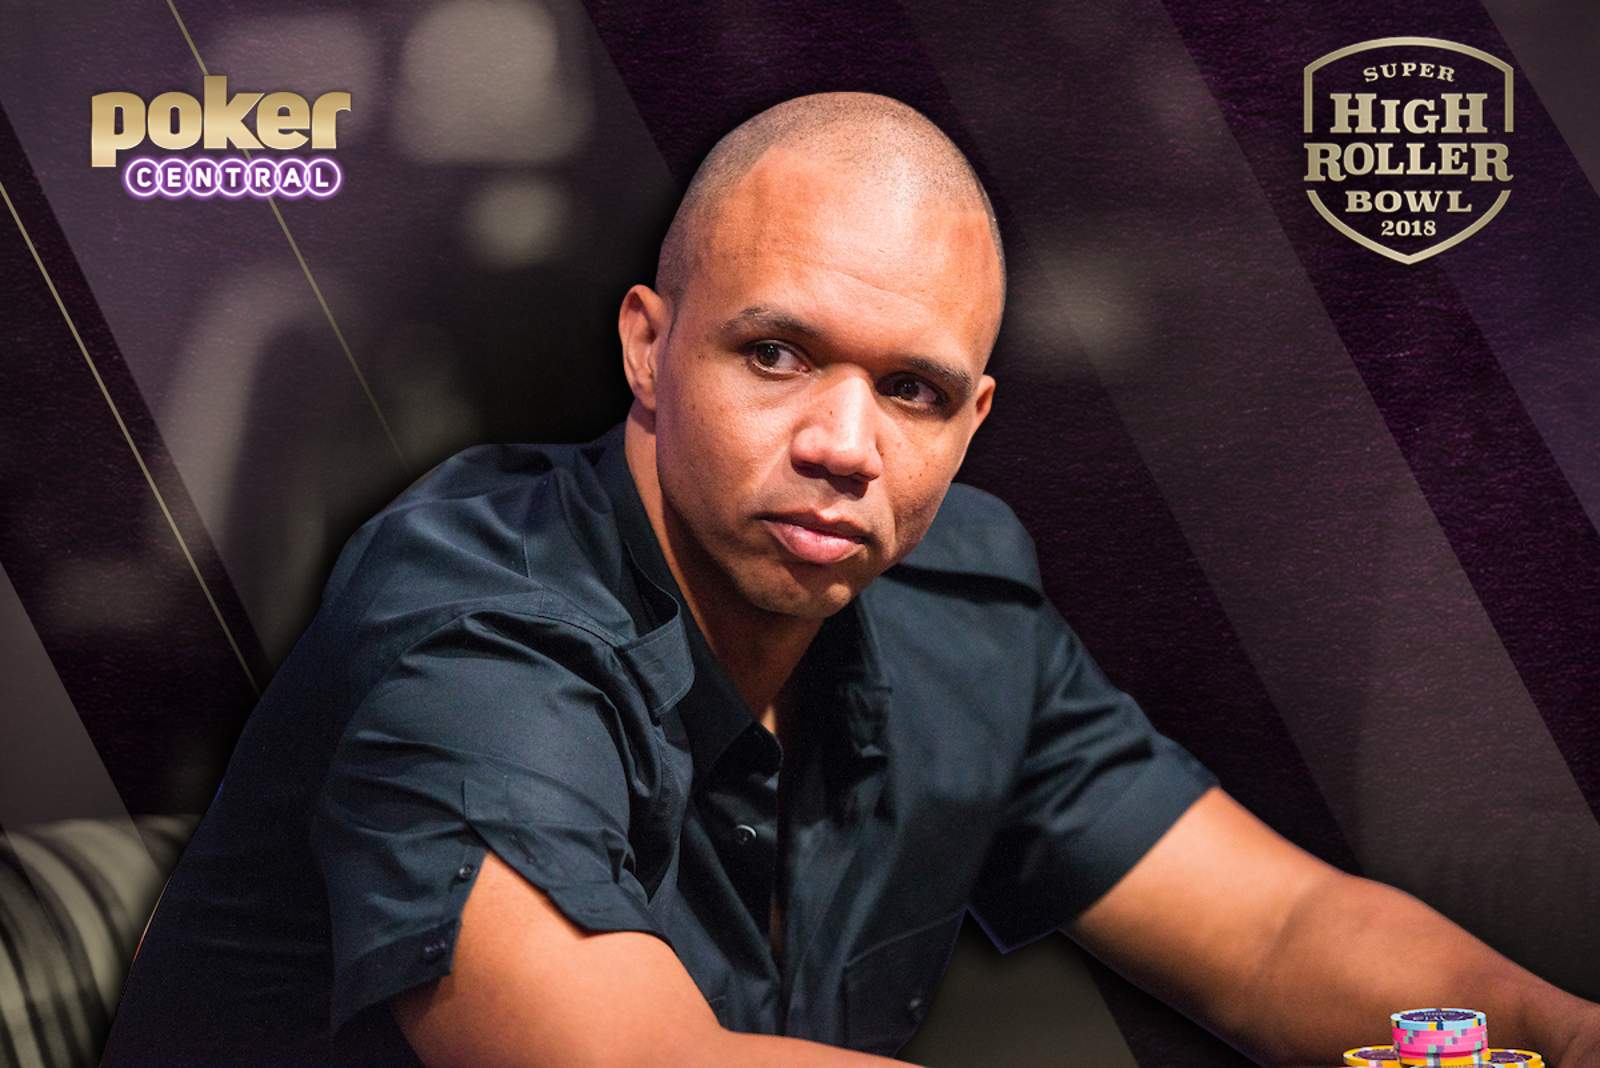 Phil Ivey Replaces "Tony G" in 2018 Super High Roller Bowl